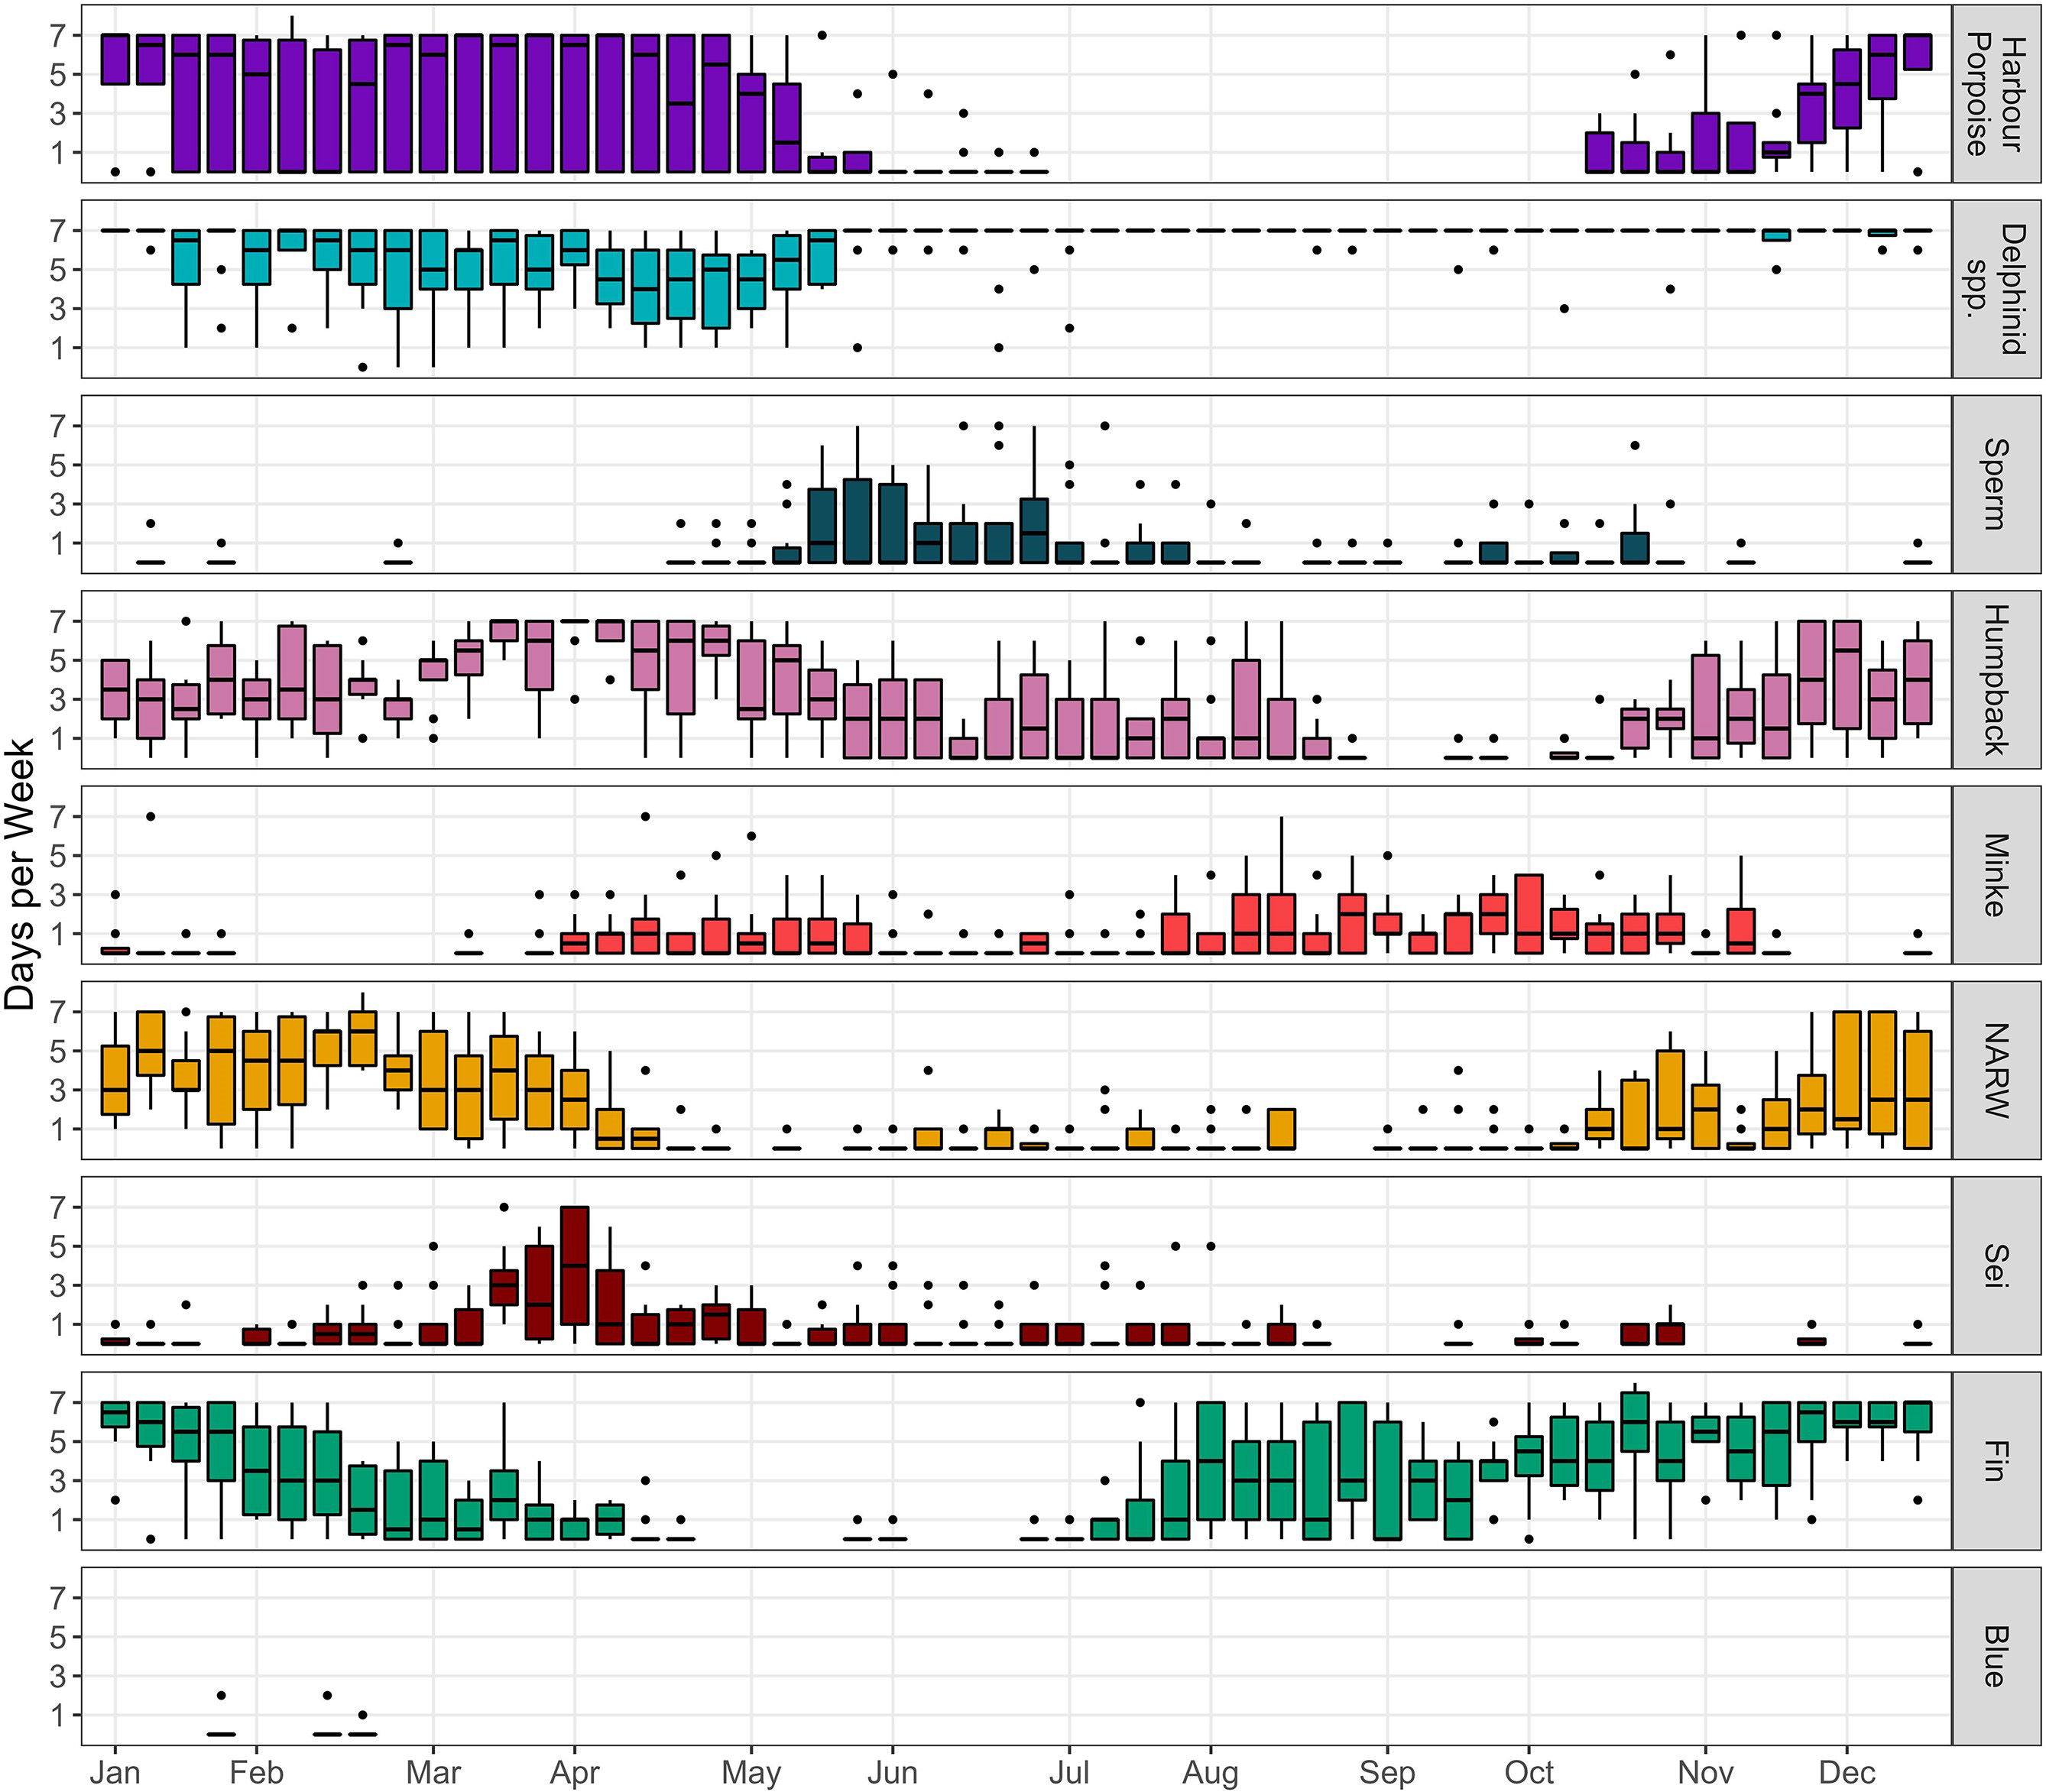 Weekly acoustic presence summary of eight cetacean species (harbor porpoise, sperm whale, humpback whale, minke whale, North Atlantic right whale (NARW), sei whale, fin whale, blue whale) and one family (Delphinid sp.). The boxplots represent the median number of days of acoustic presence per calendar week across all data at four recording sites, in the southern New England offshore wind energy area. Only recorders with 2 or more years of data (NS01, NS02, COX01, and COX02) were used. Horizontal lines withi